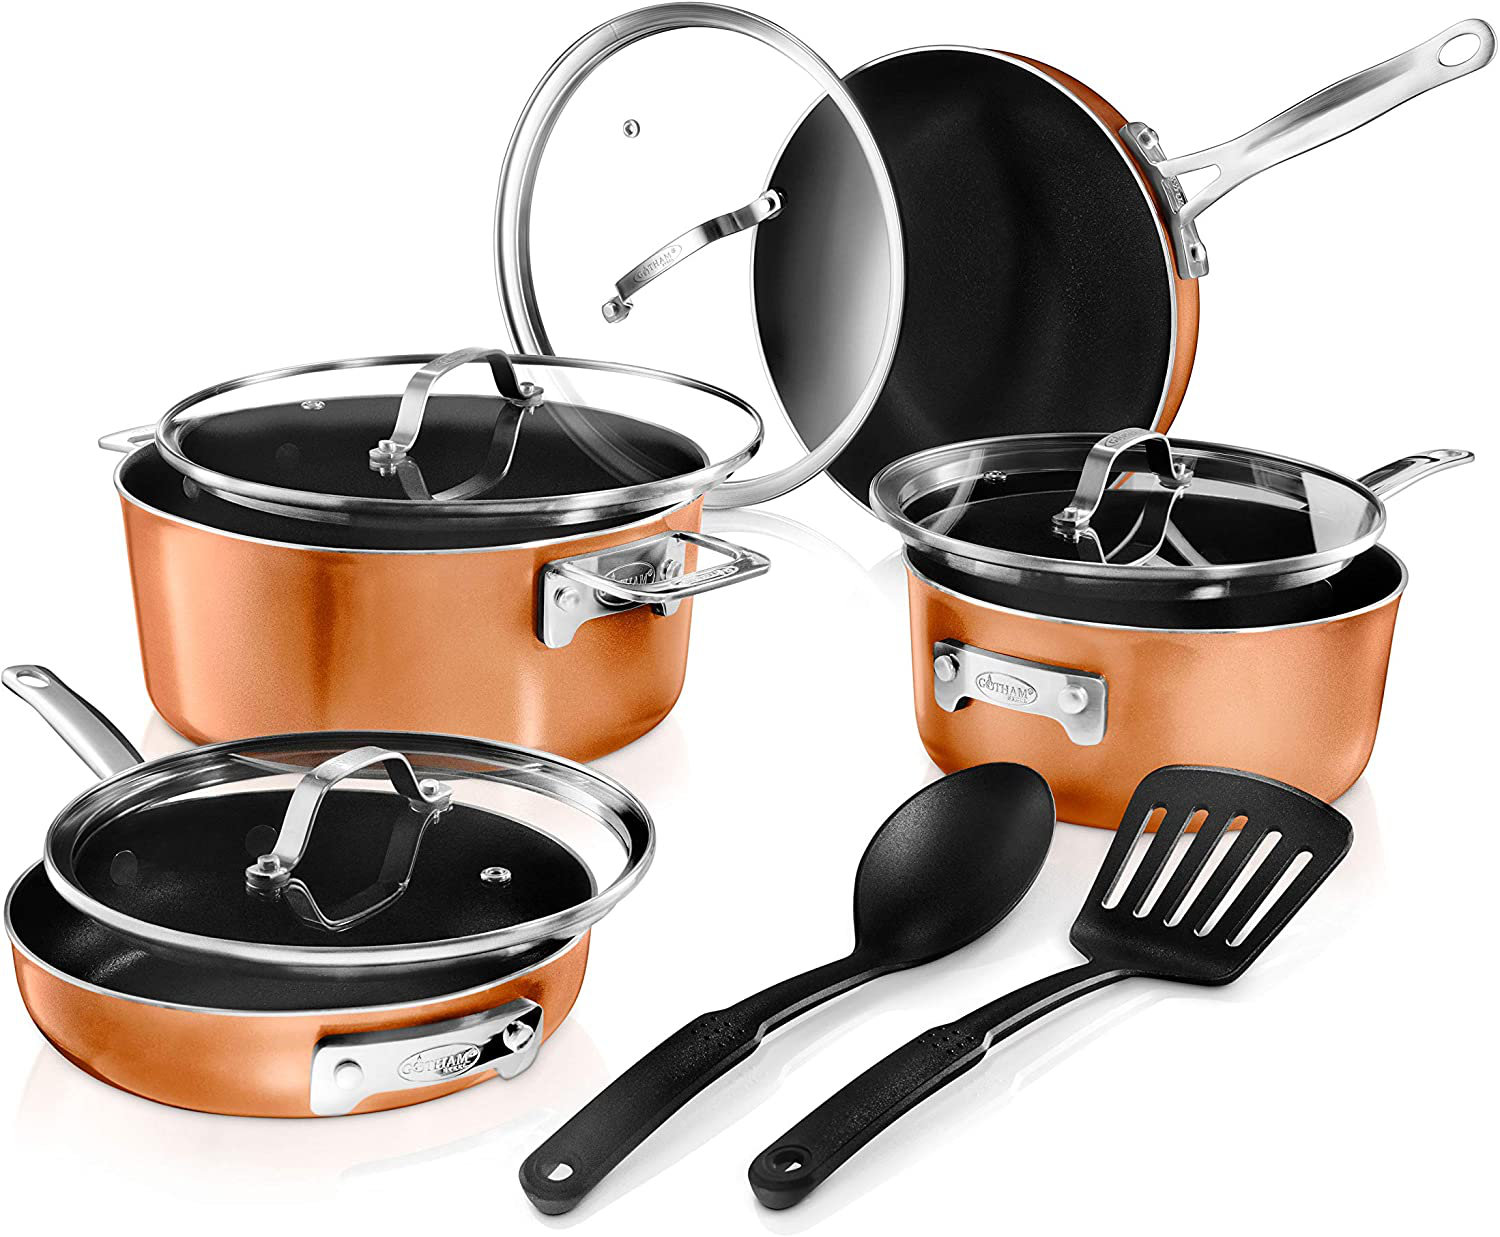 Cookware Set Non Stick Stainless Steel 10 Piece Pieces Pots and Pans NEW 